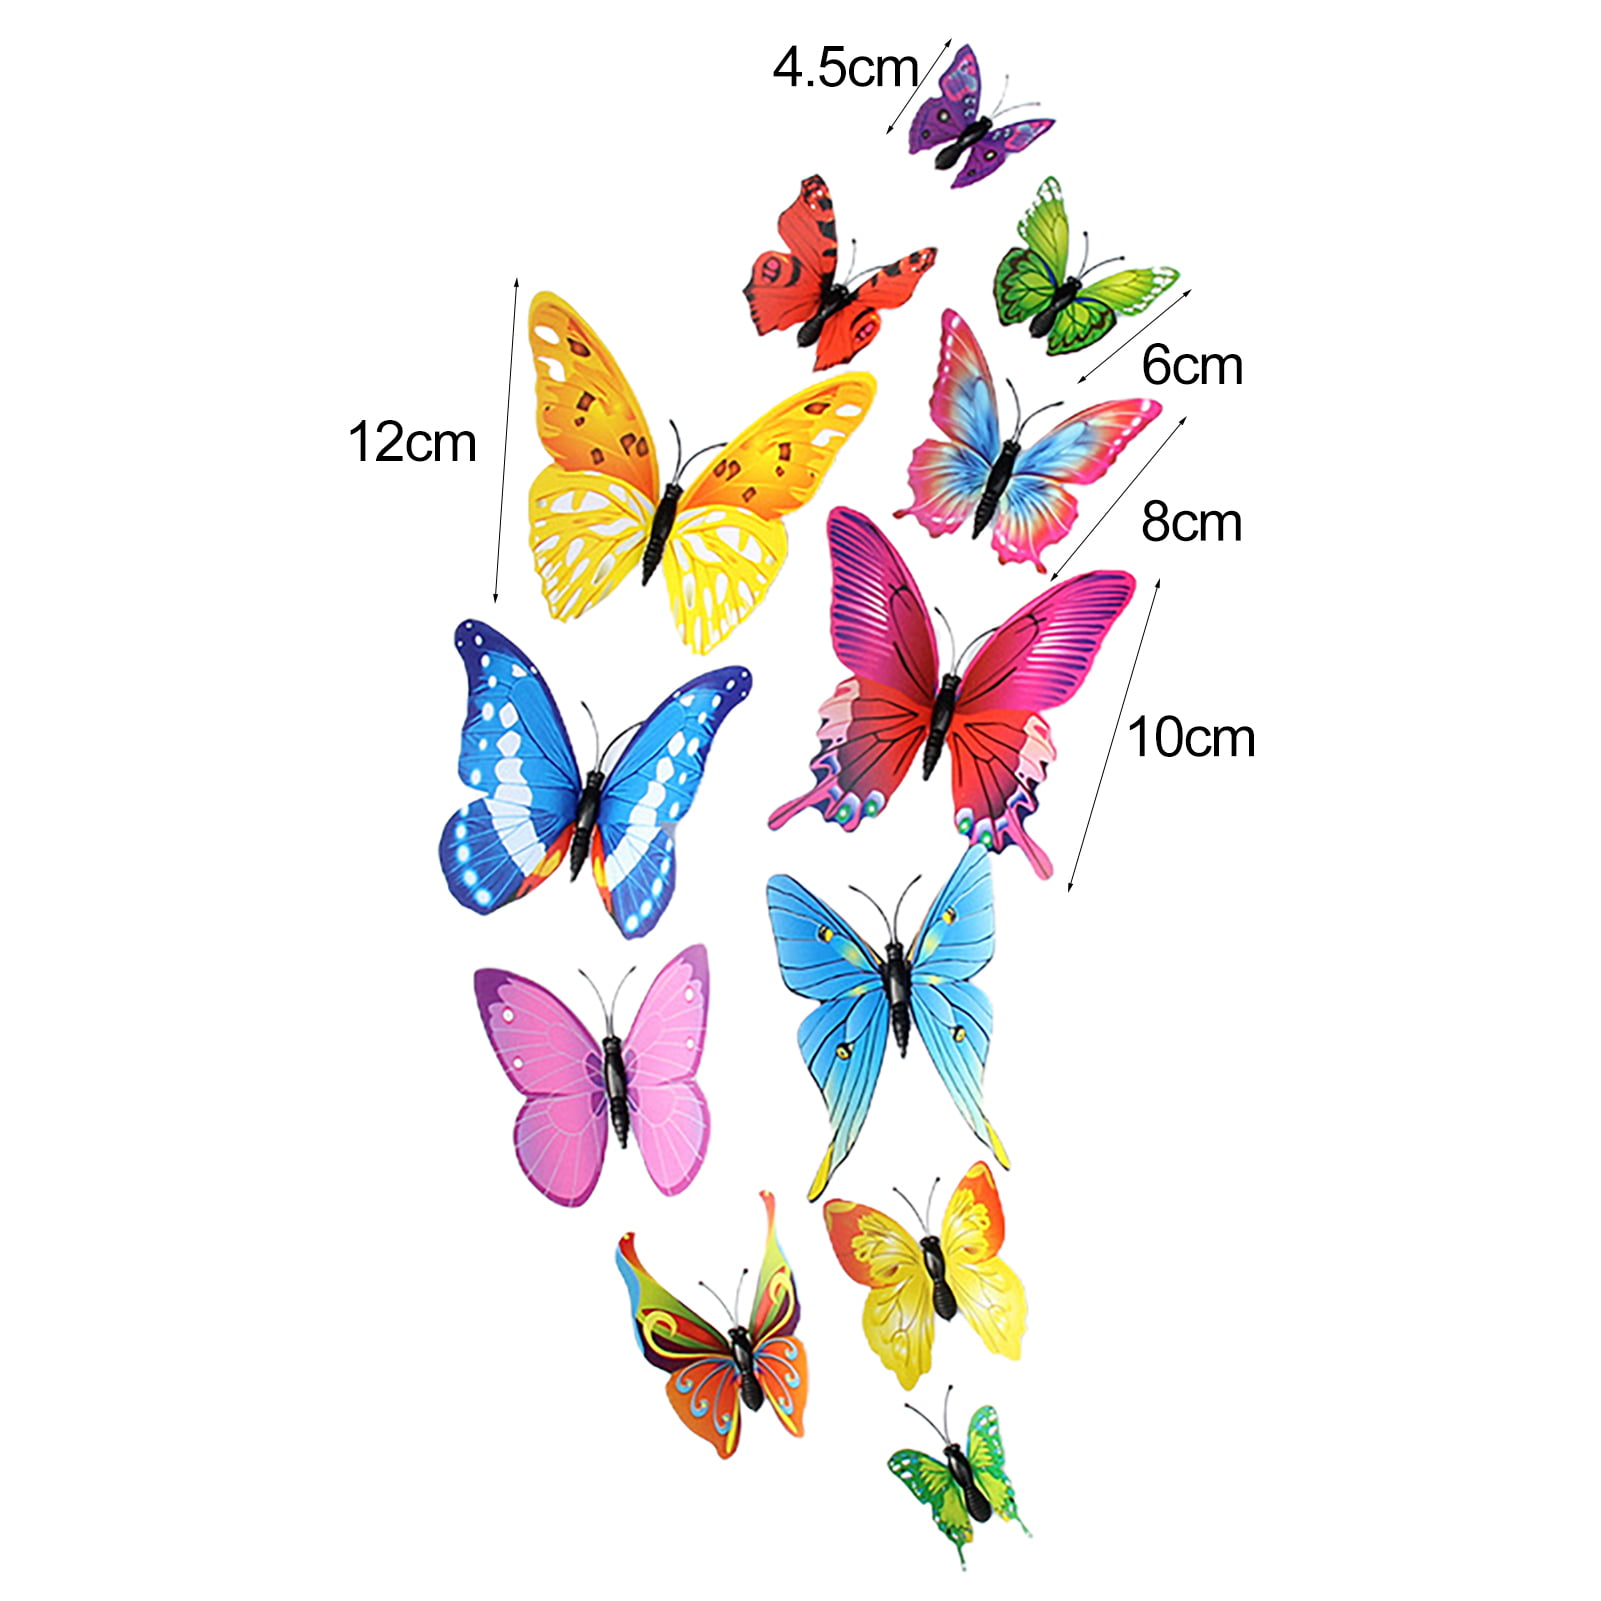 DTLIFEK 60PCS 3D Butterfly Wall Decals 5 Color Glow in The Dark Butterflies  Wall Stickers DIY Removable Luminous Self-Adhesive Butterfly Wall Crafts